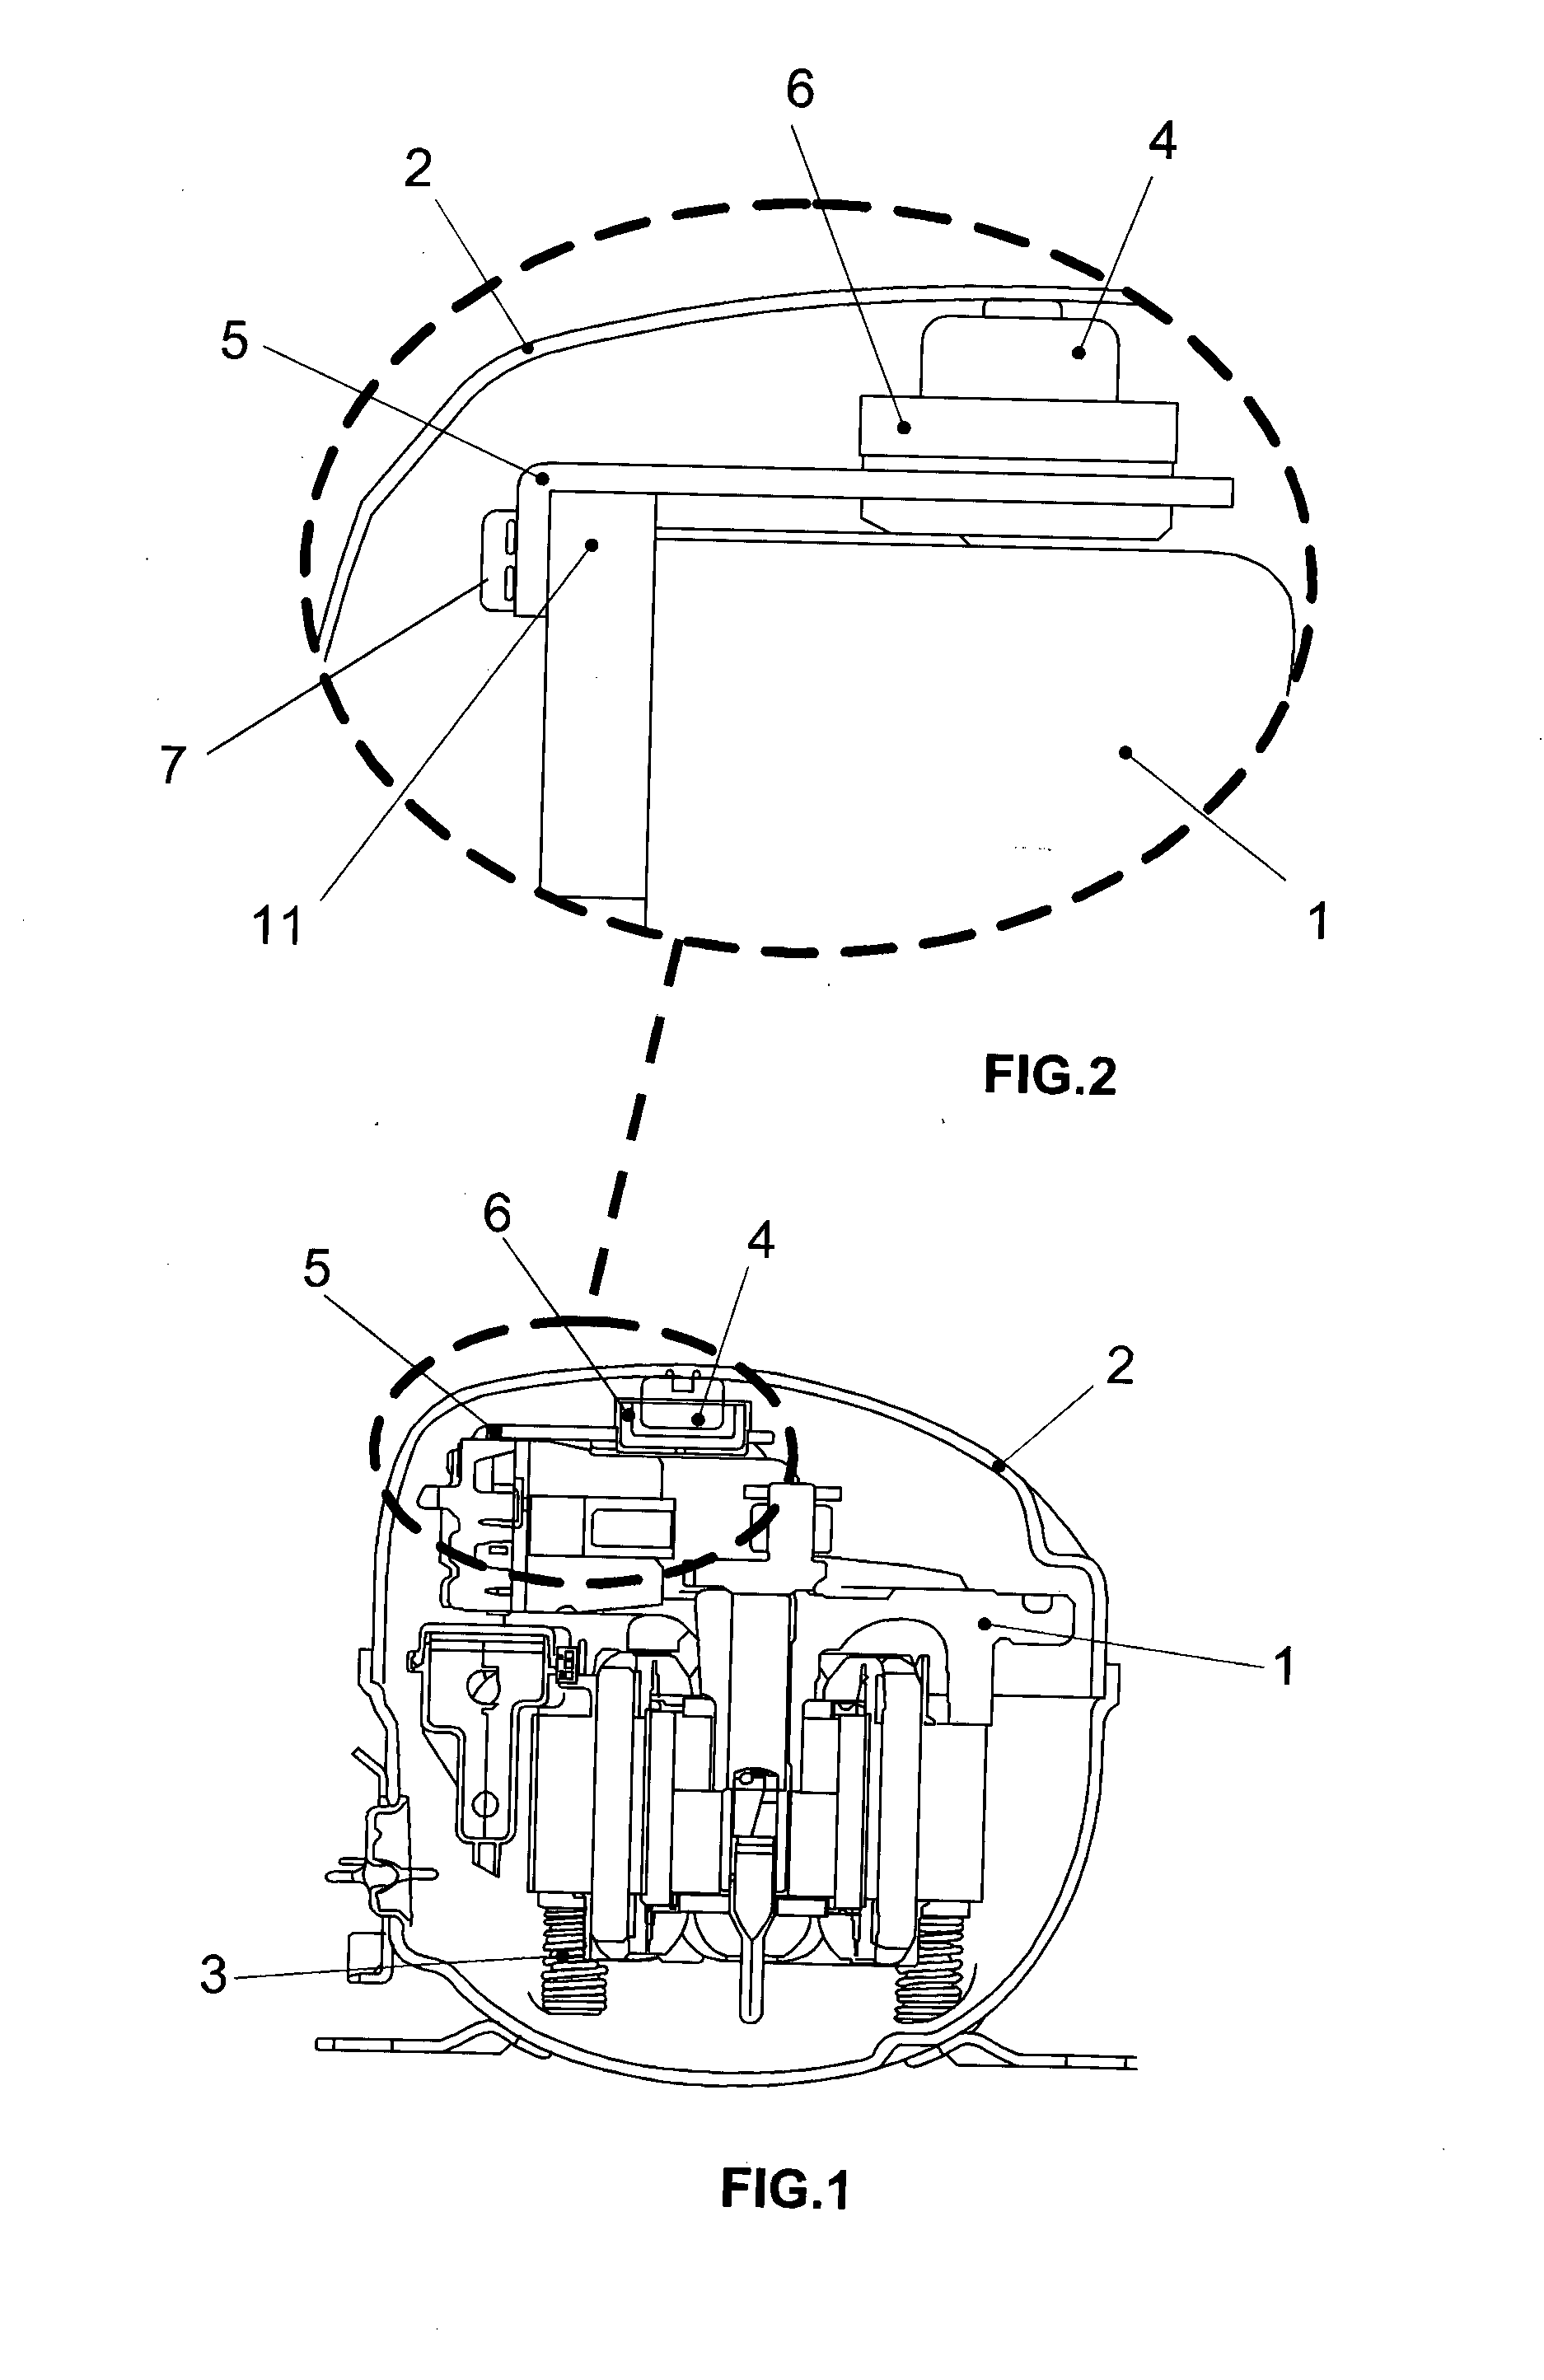 Hermetic Reciprocating Compressor for Mobile Application Provided With a Movement Limiting Assembly